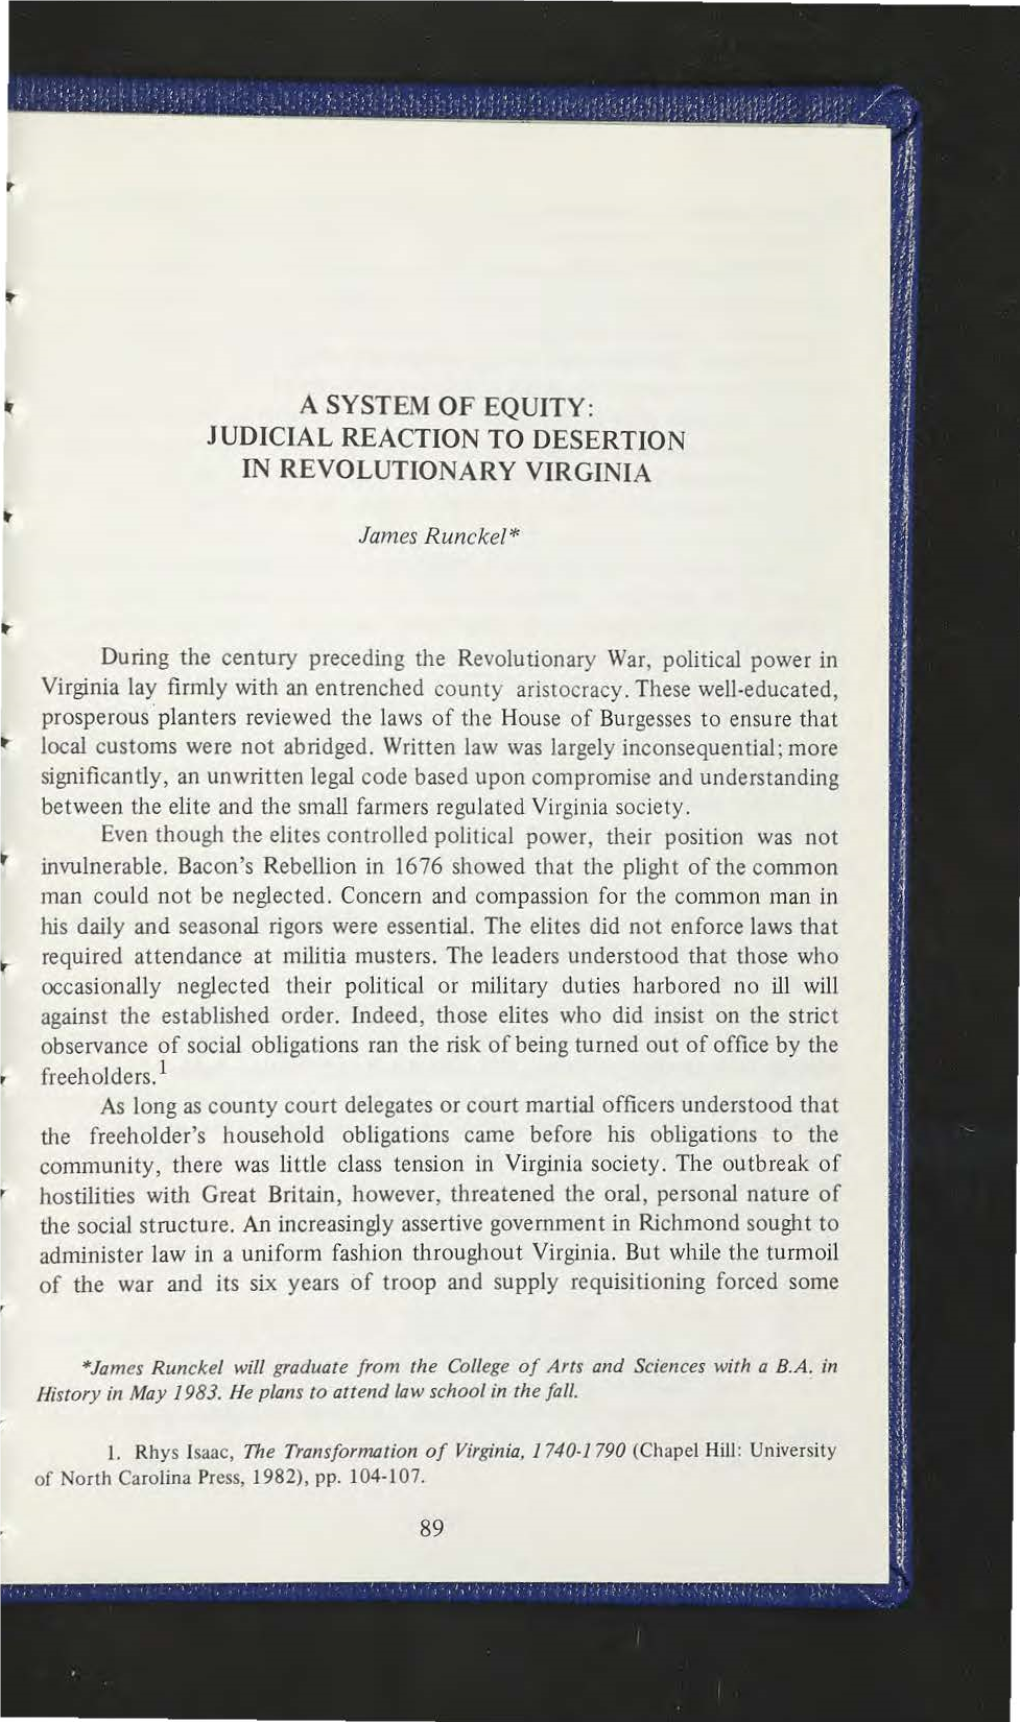 A System of Equity: Judicial Reaction to Desertion in Revolutionary Virginia